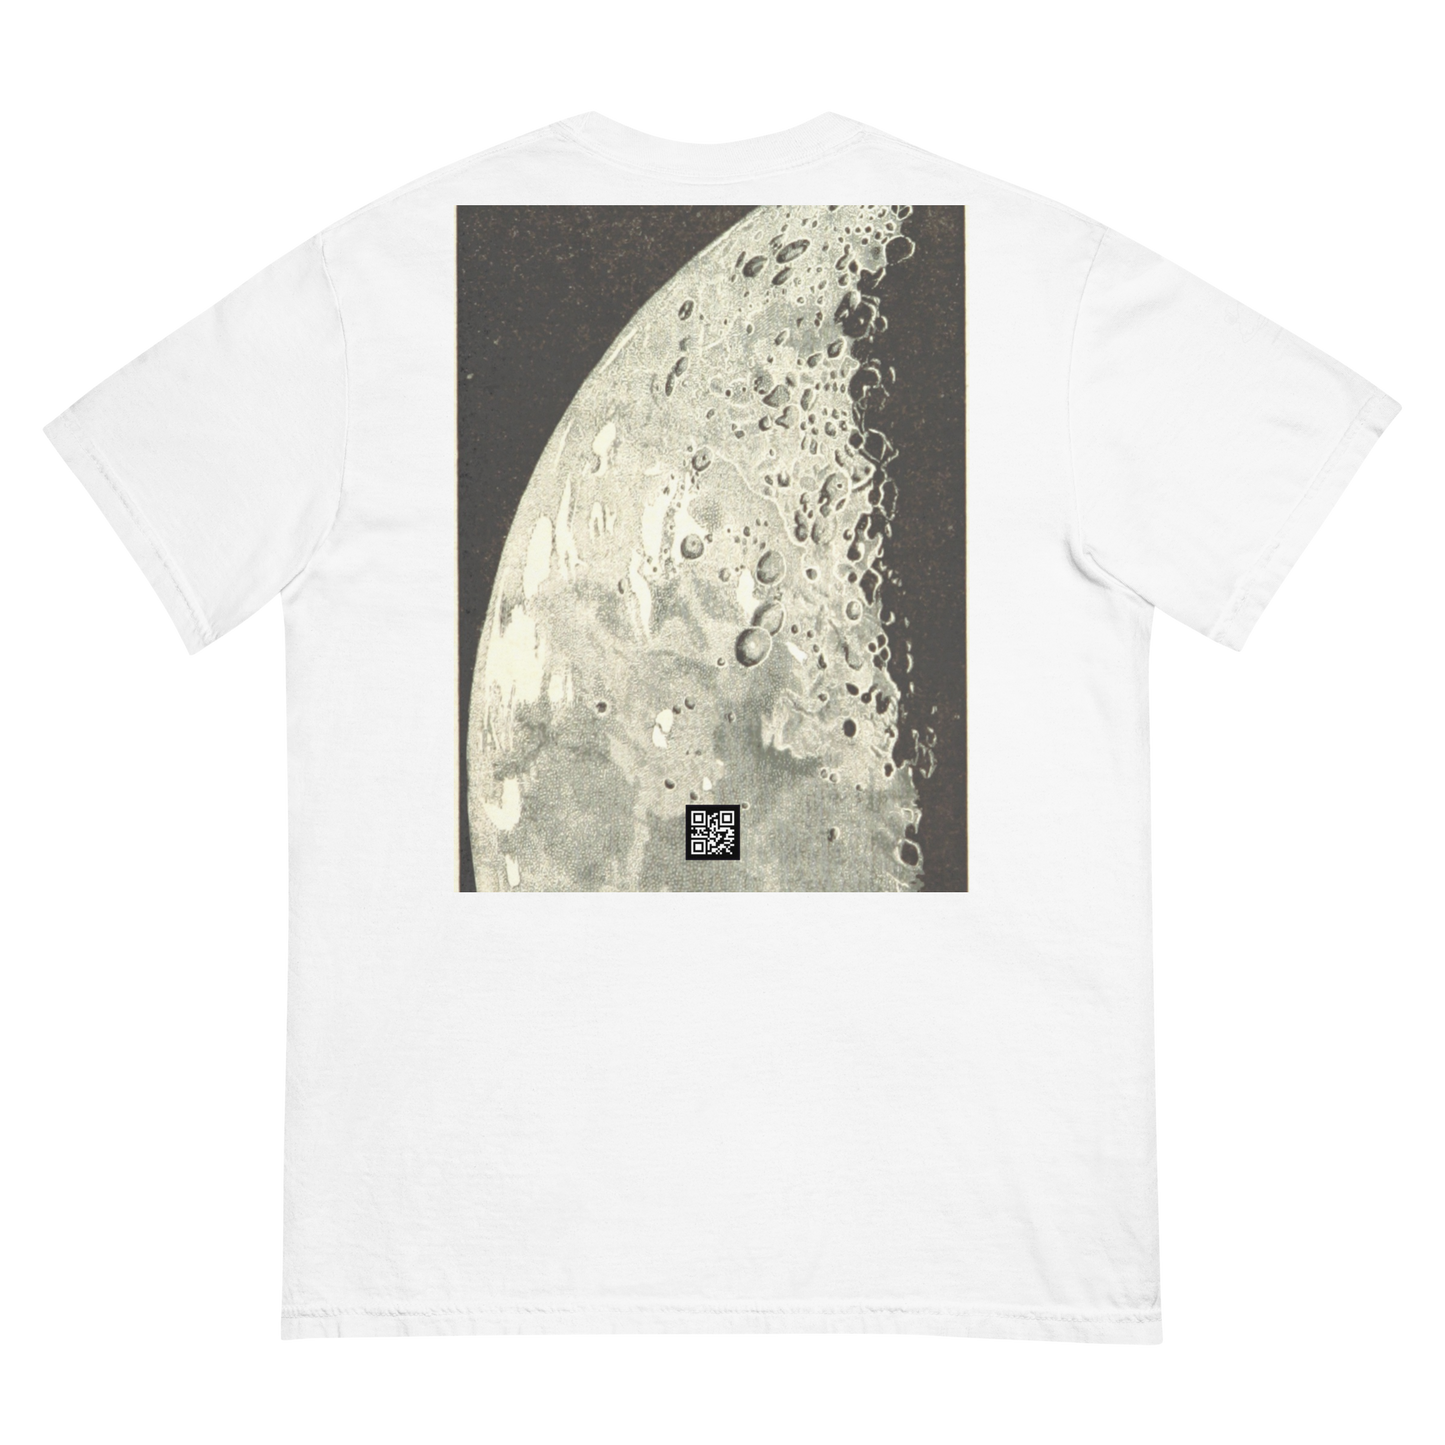 "how to view space" 001 tee